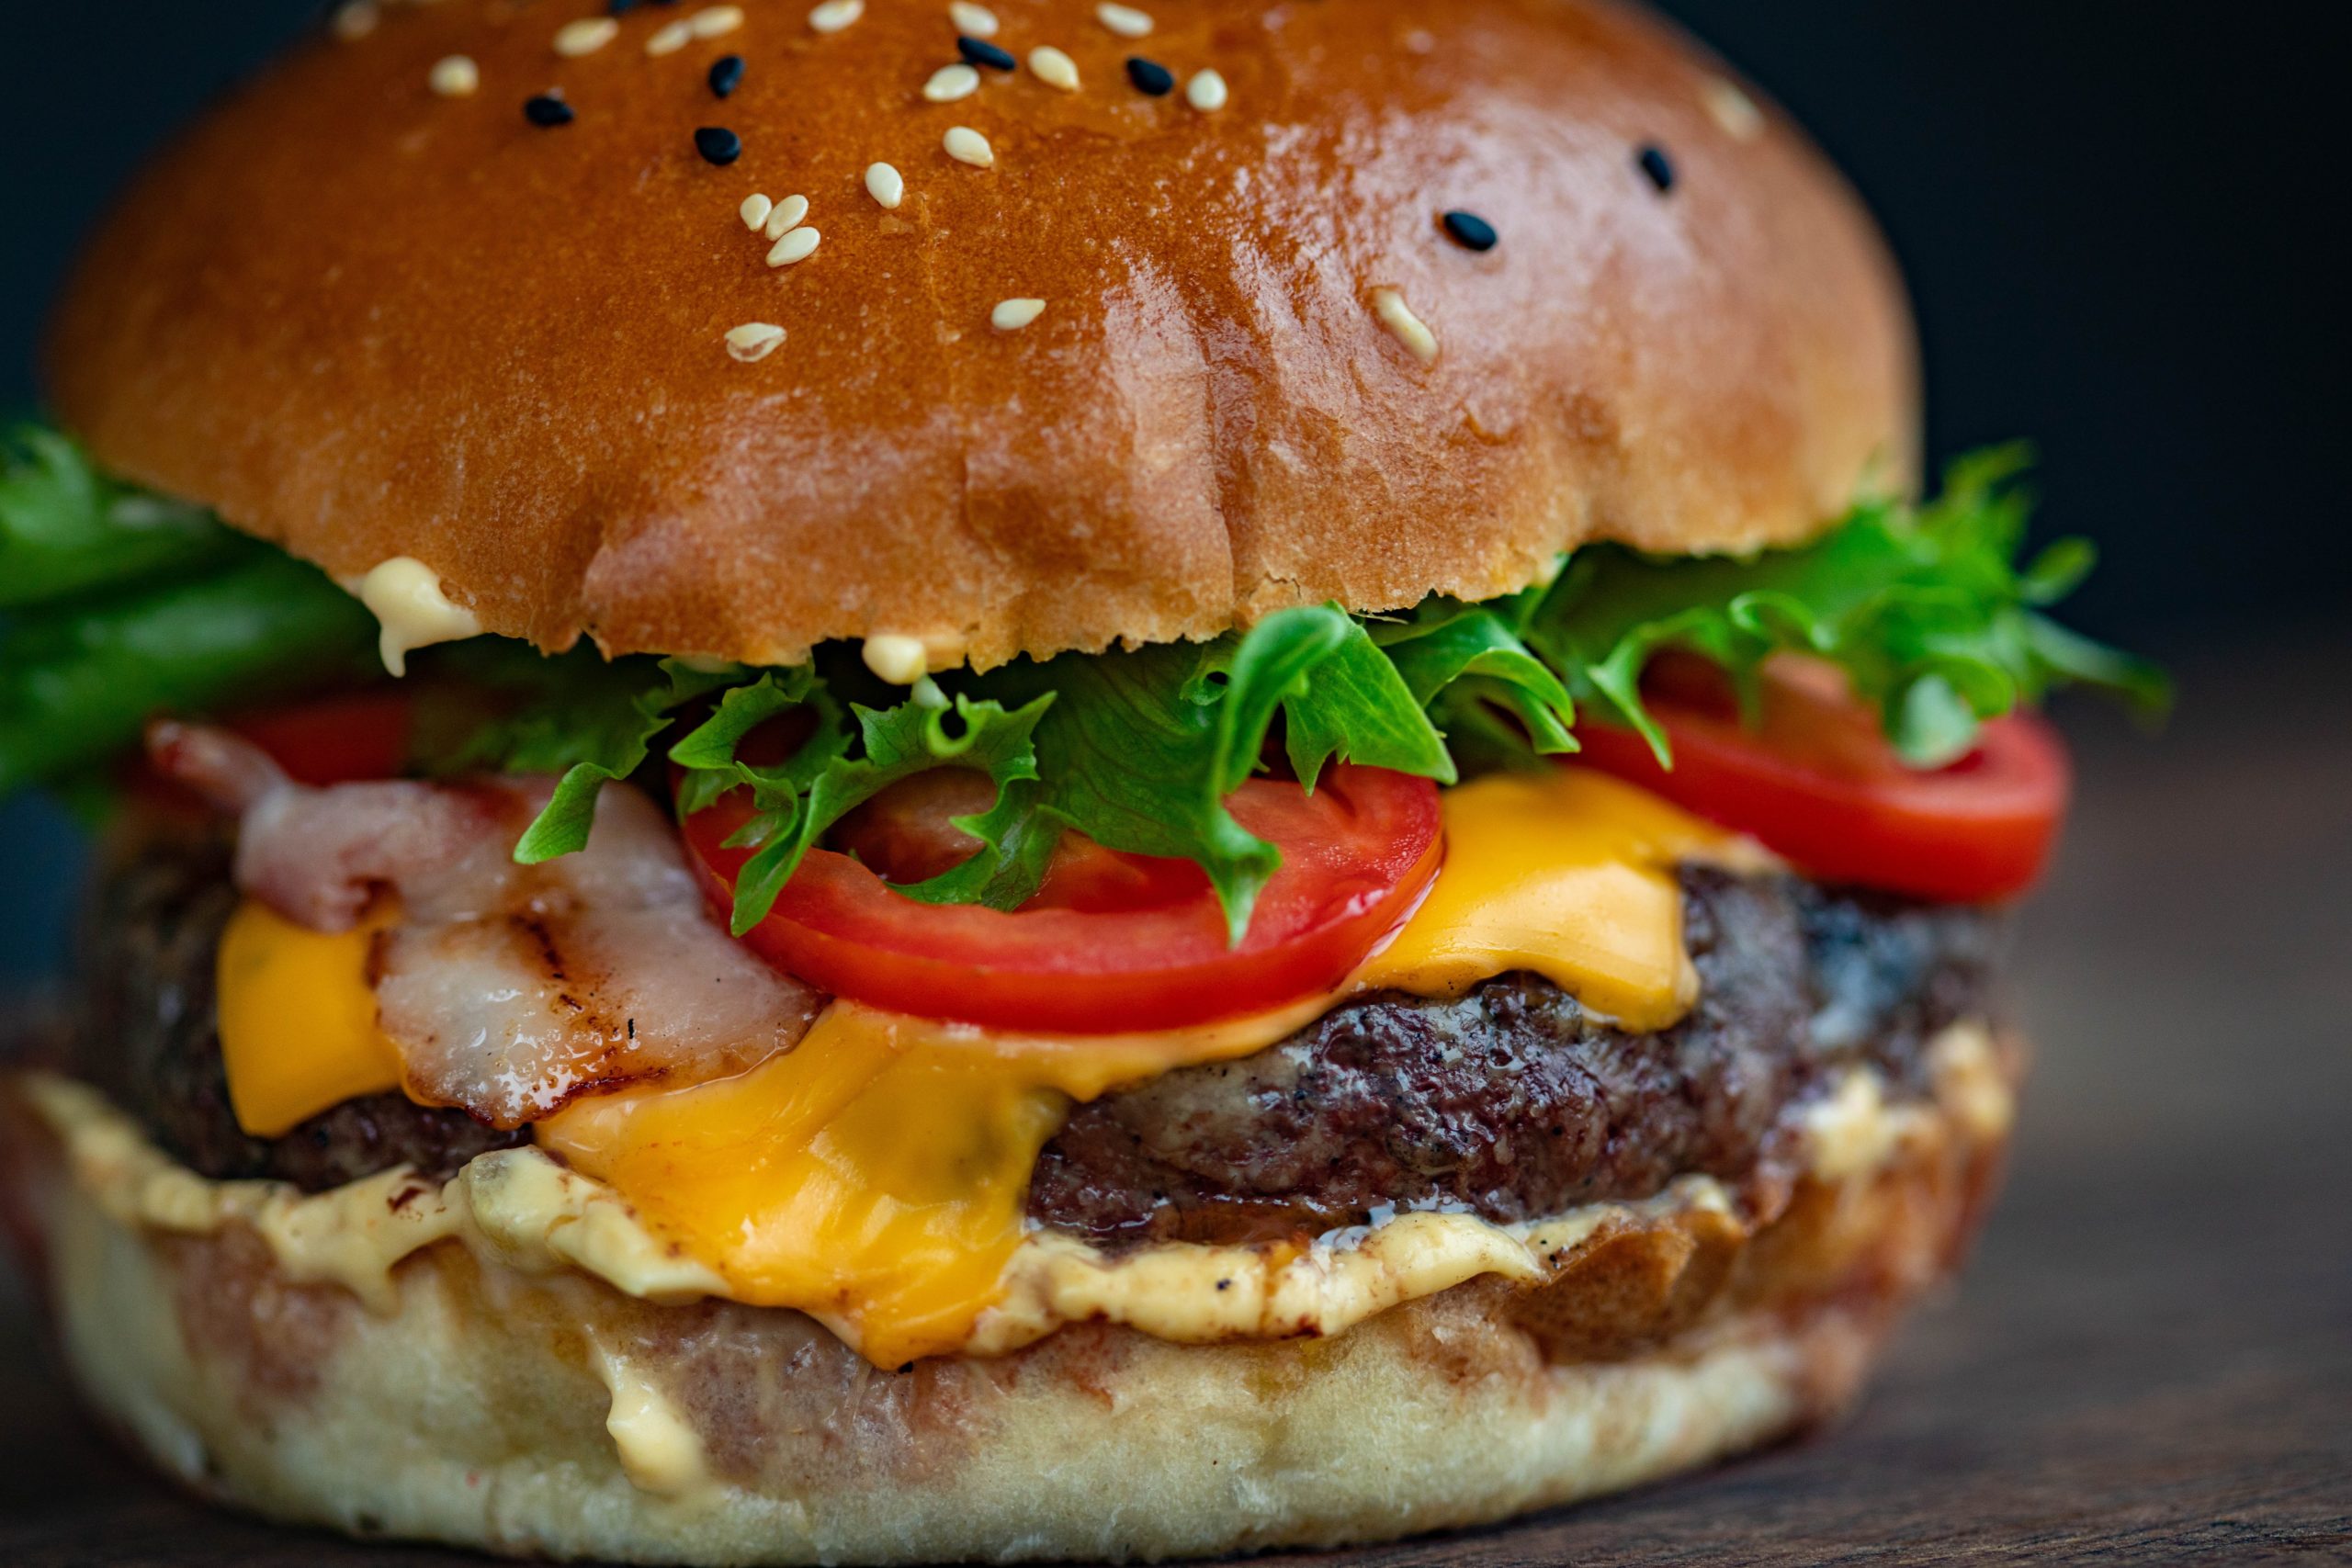 Close-up of a cheeseburger with fixings